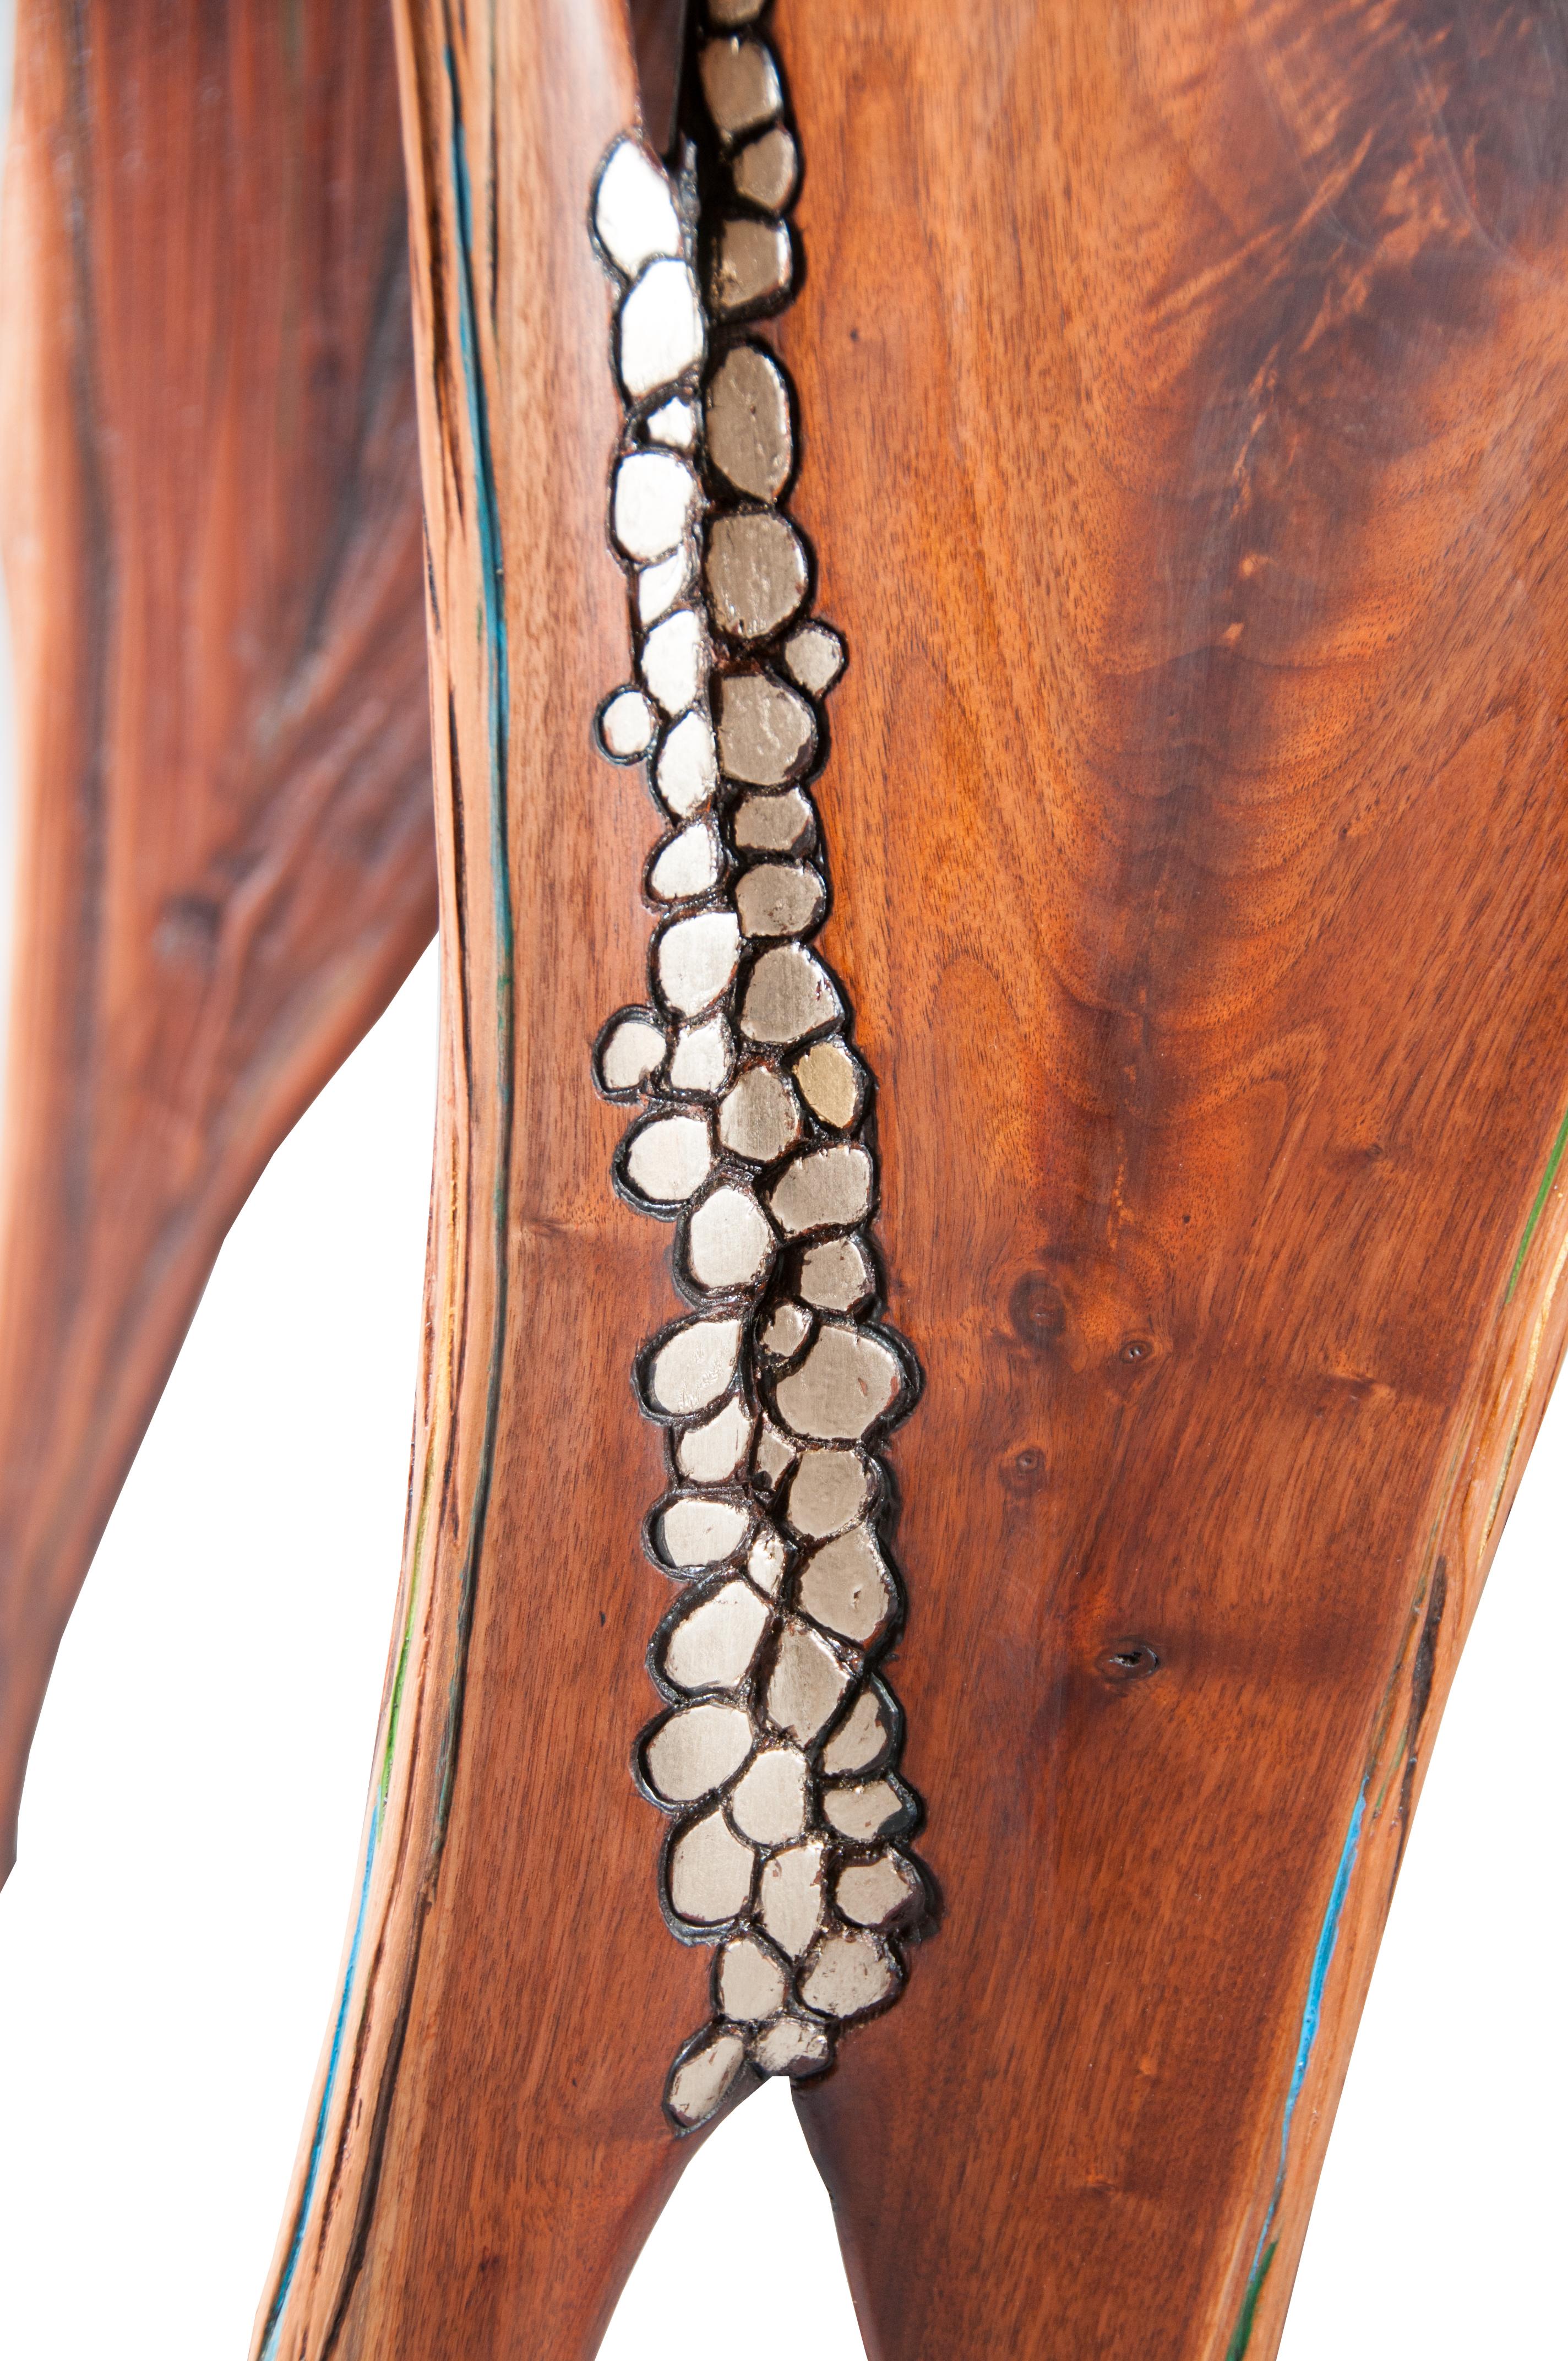 Sculptural Live Edge Walnut Occasional Table with Gilded and Carved Elements im Zustand „Neu“ im Angebot in New Market, MD